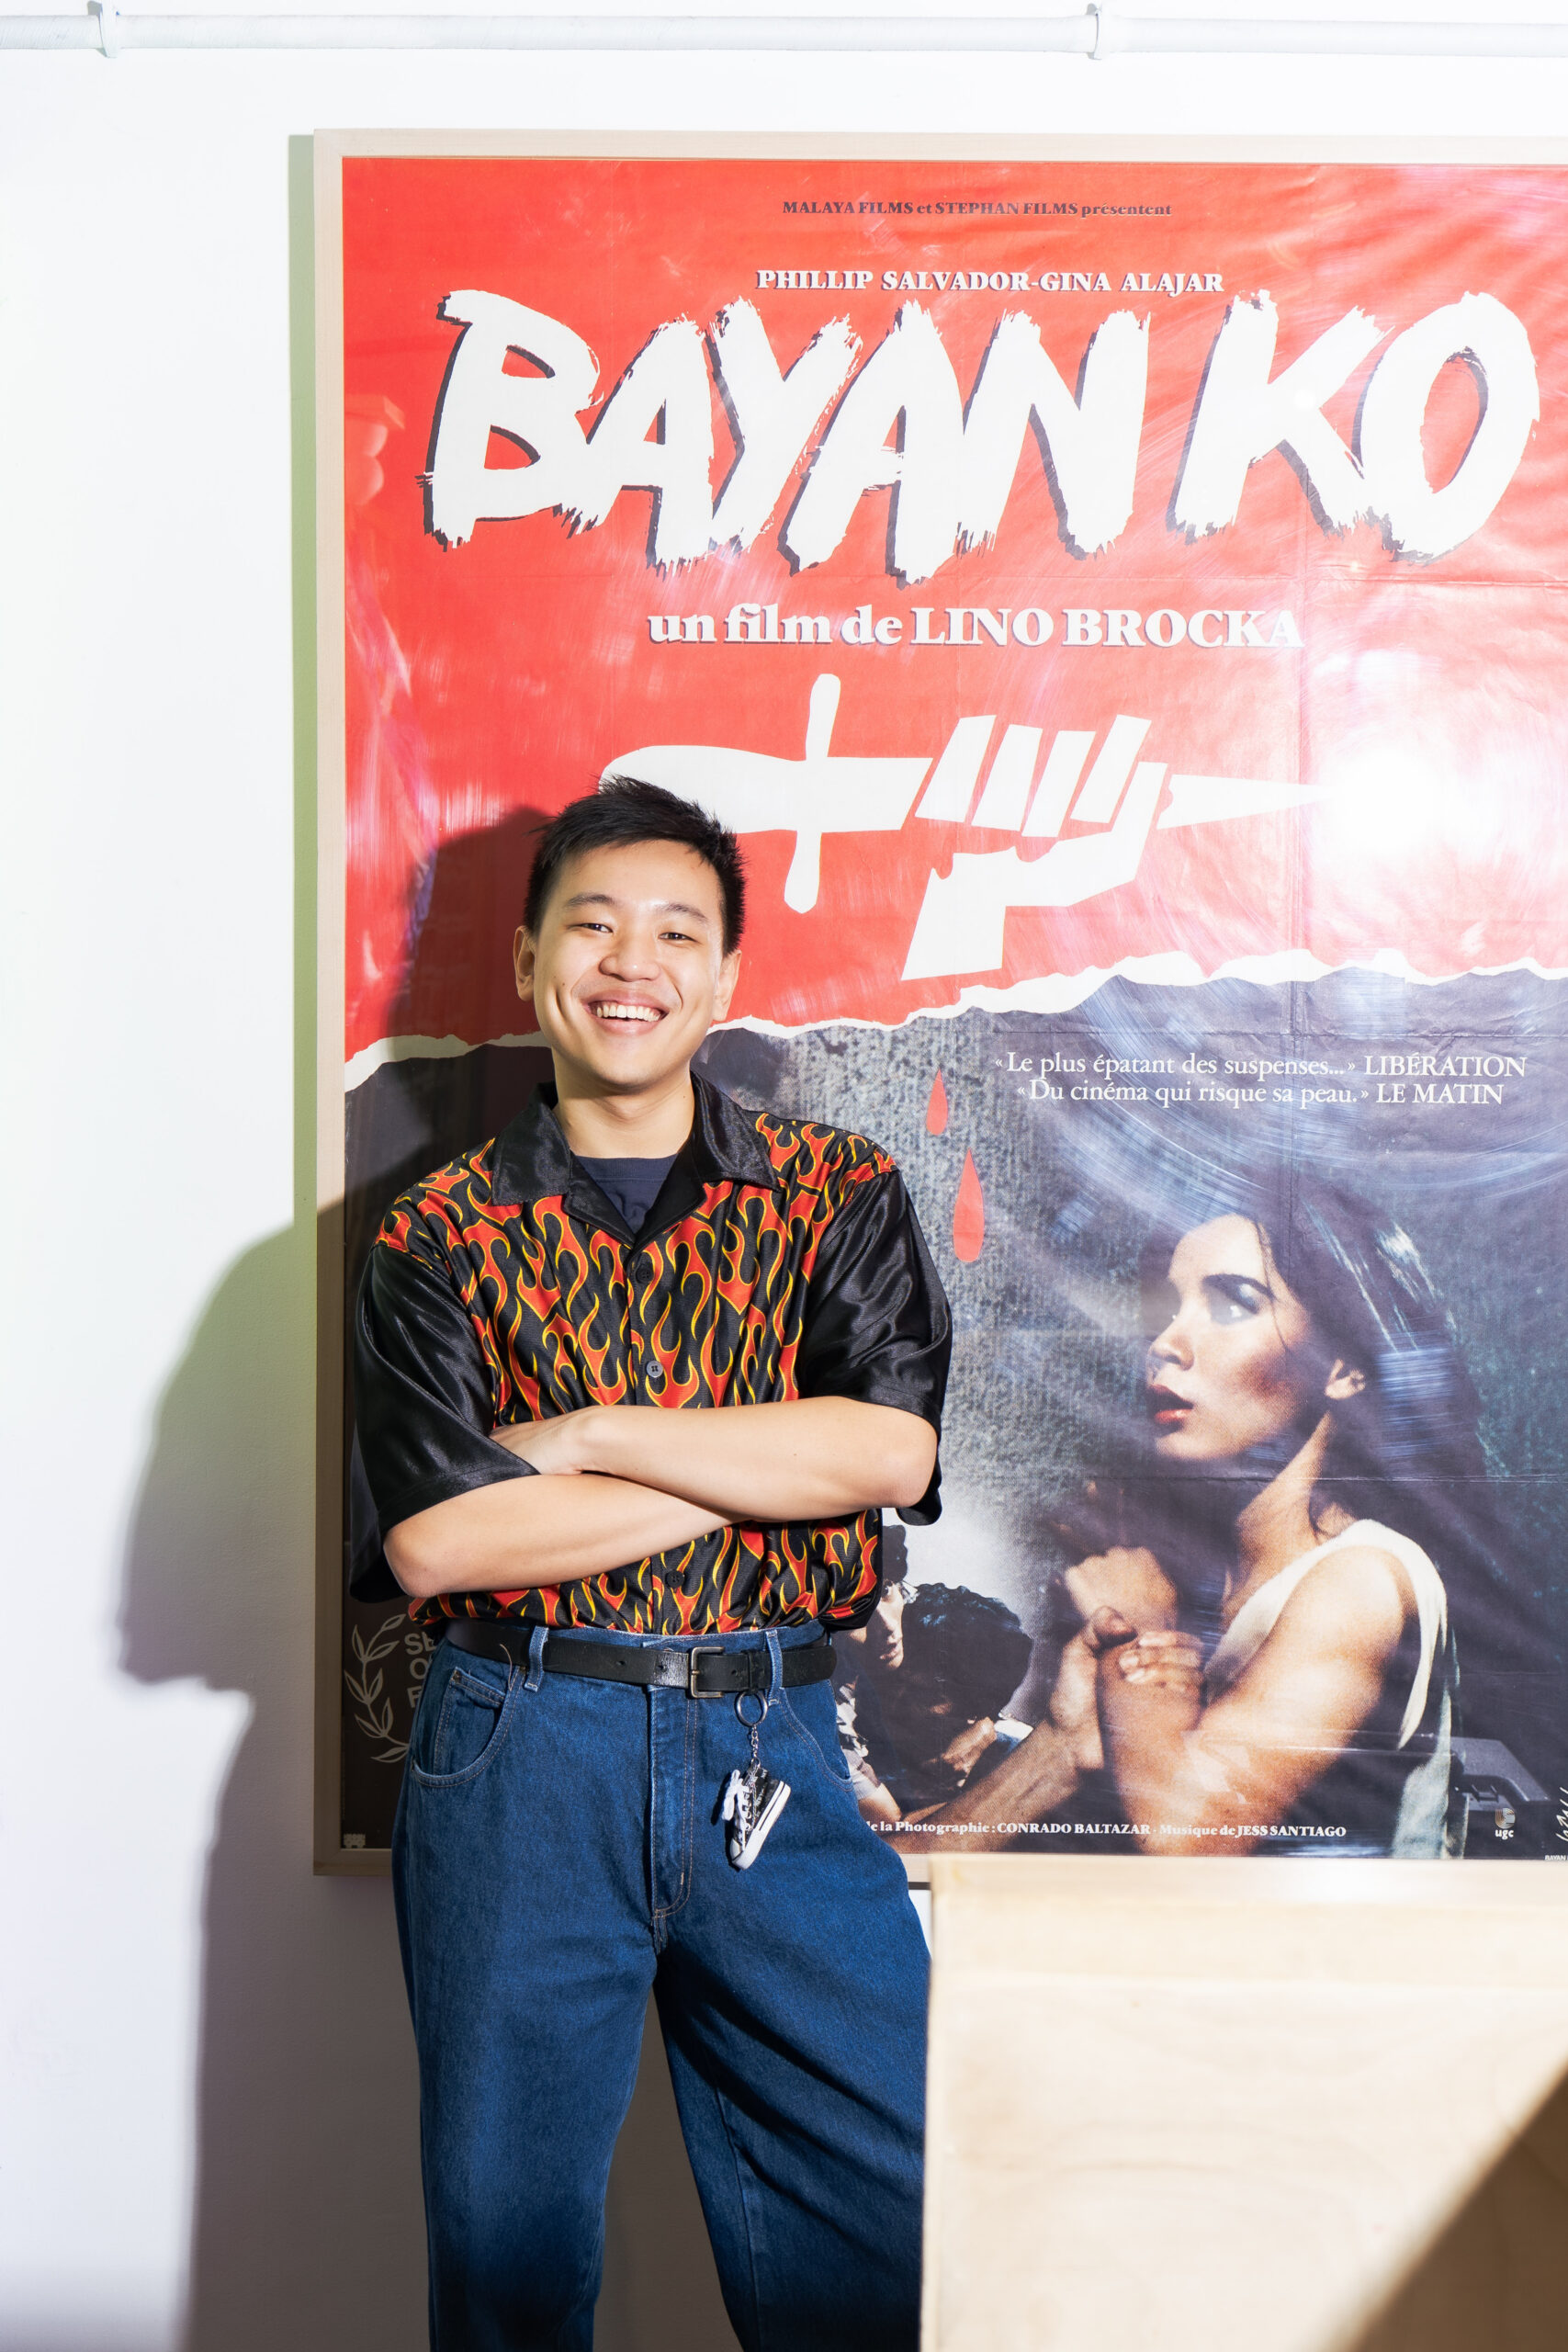 Fed Pua by the rare, meter-high poster of Lino Brocka's film "Bayan Ko" in French